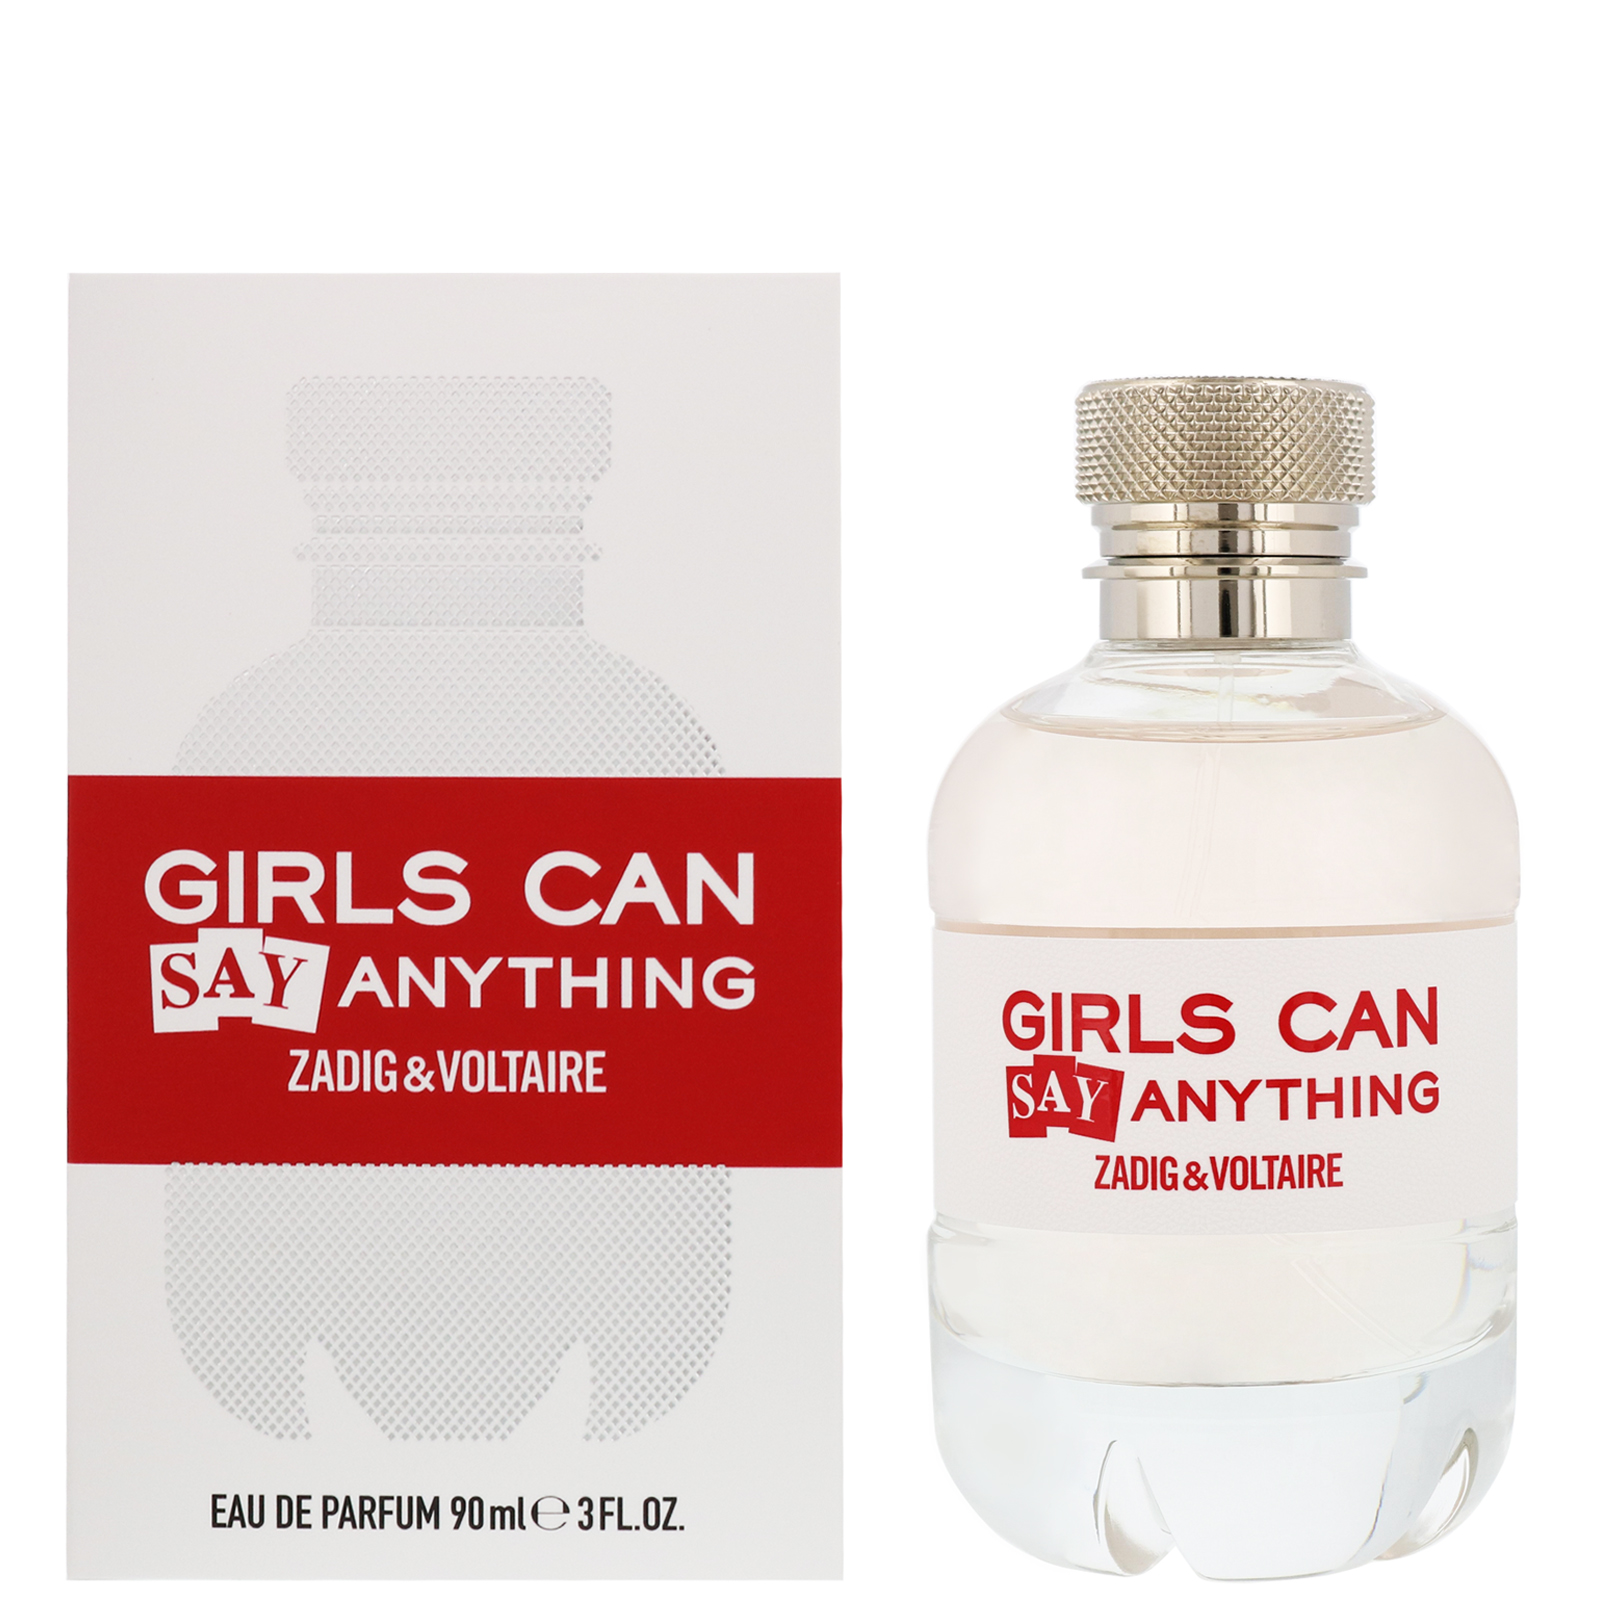 ZADIG & VOLTAIRE	GIRLS CAN SAY ANYTHING EDP 90mL